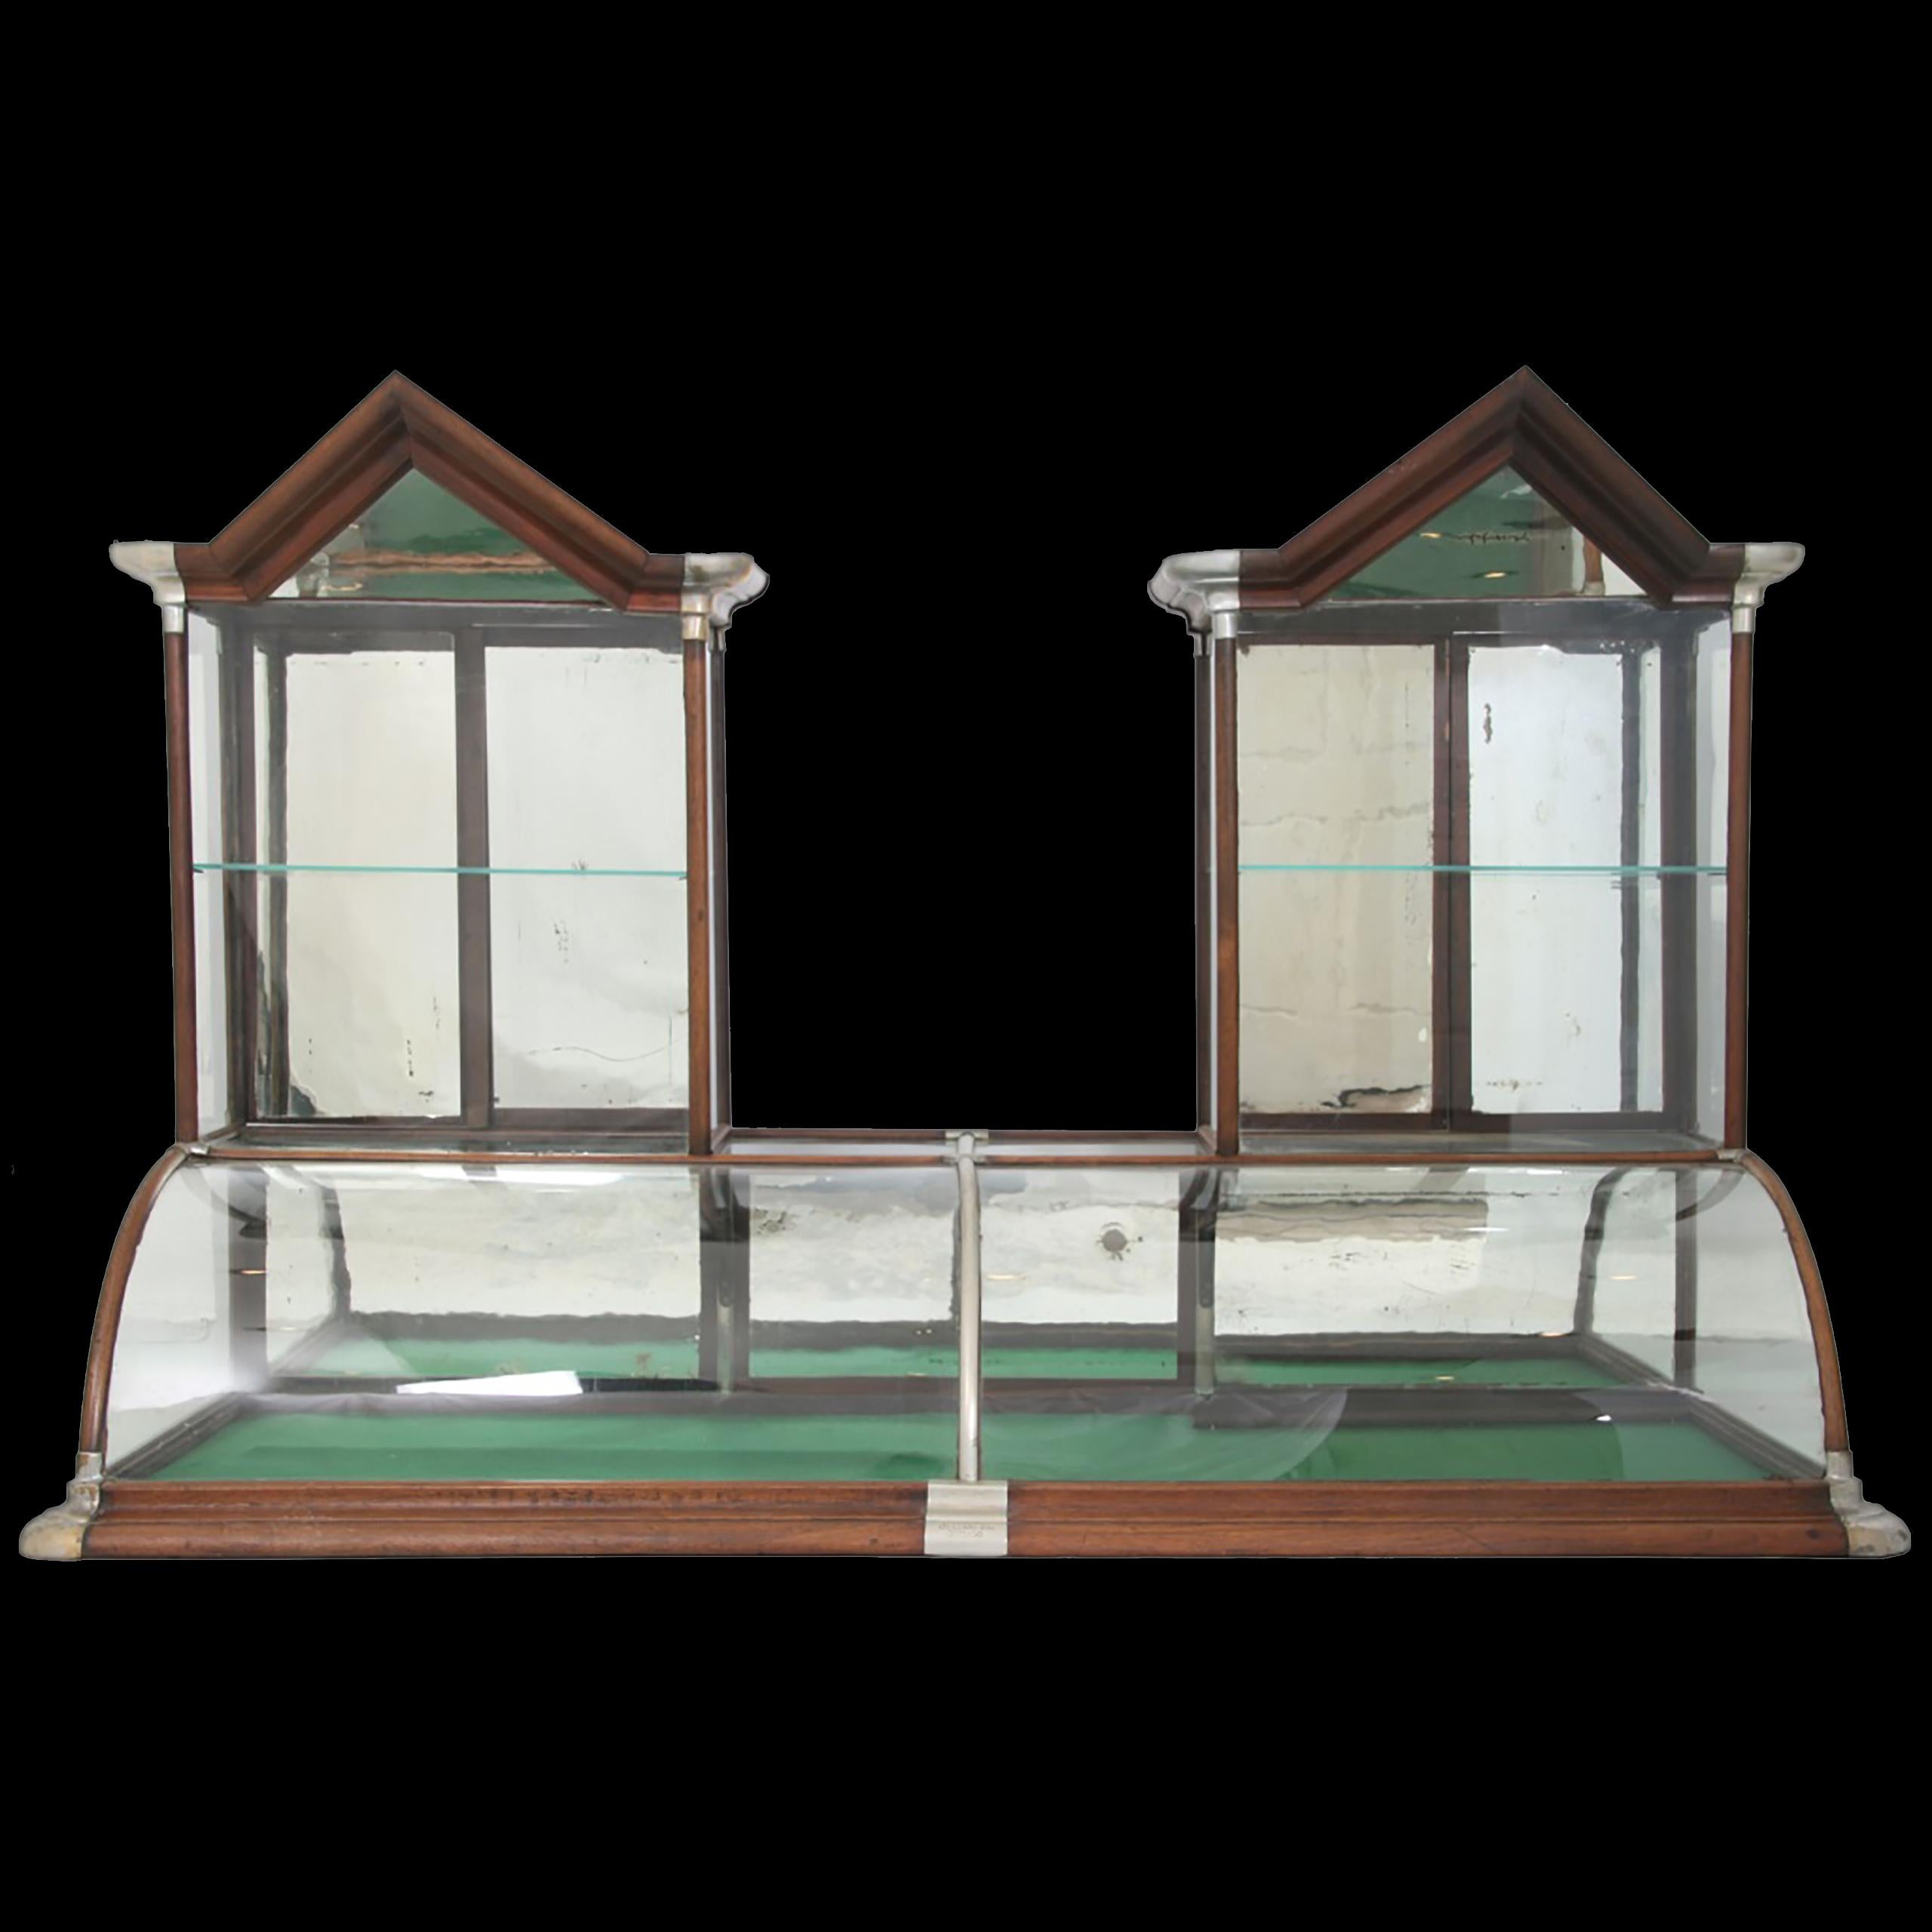 Manufactured by Excelsior Showcase Works, has a curved glass front with walnut trim and nickel-silver mounts and corner trim, has 2 towers on the top with overhanging pointed pediments with mirrored peaks and mirrored sliding doors in the rear.